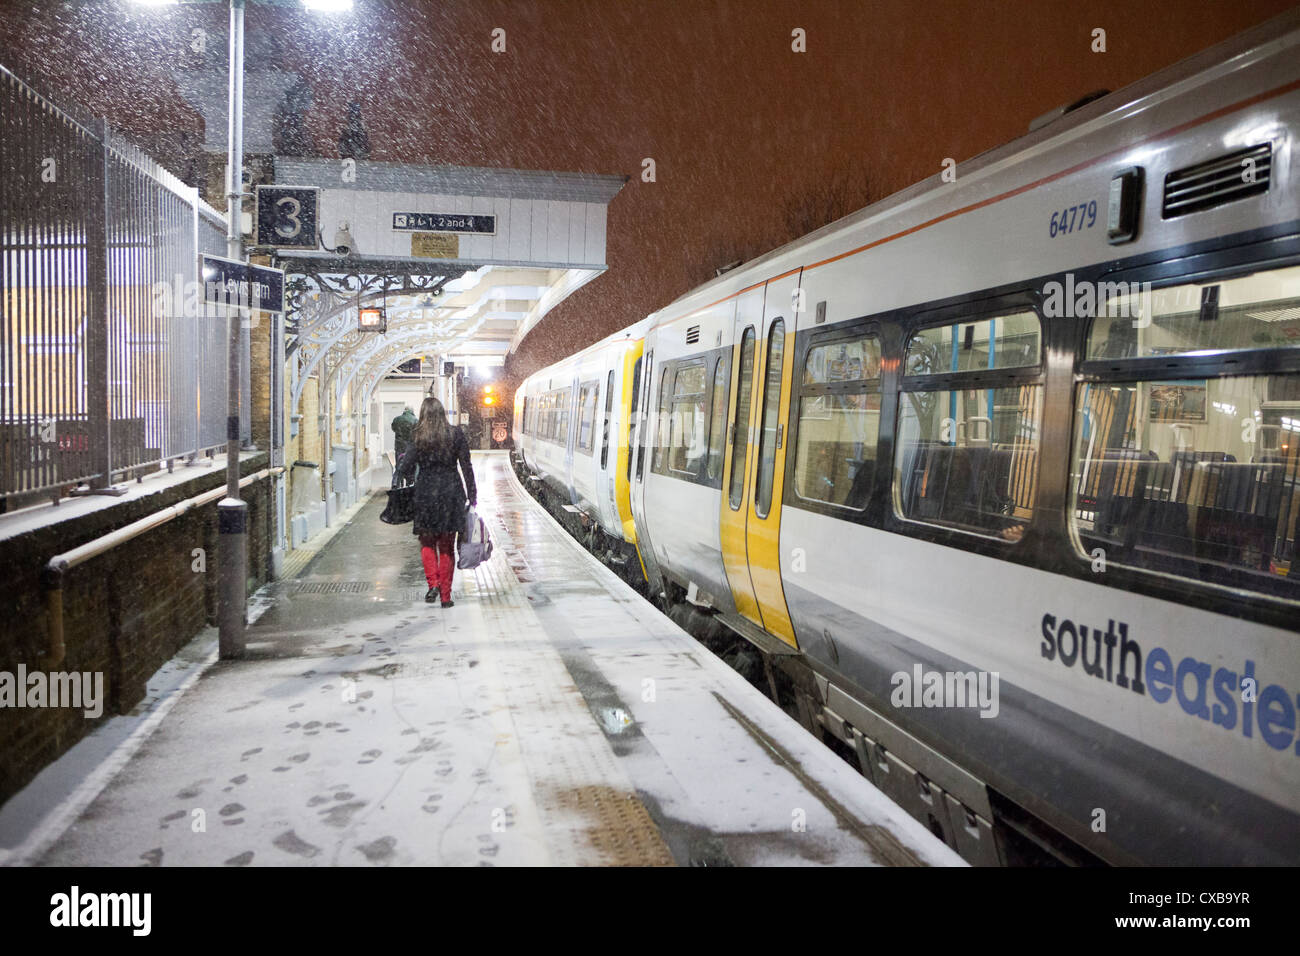 Snowy platform, woman in red trousers and Southeastern train at Lewisham Station Stock Photo